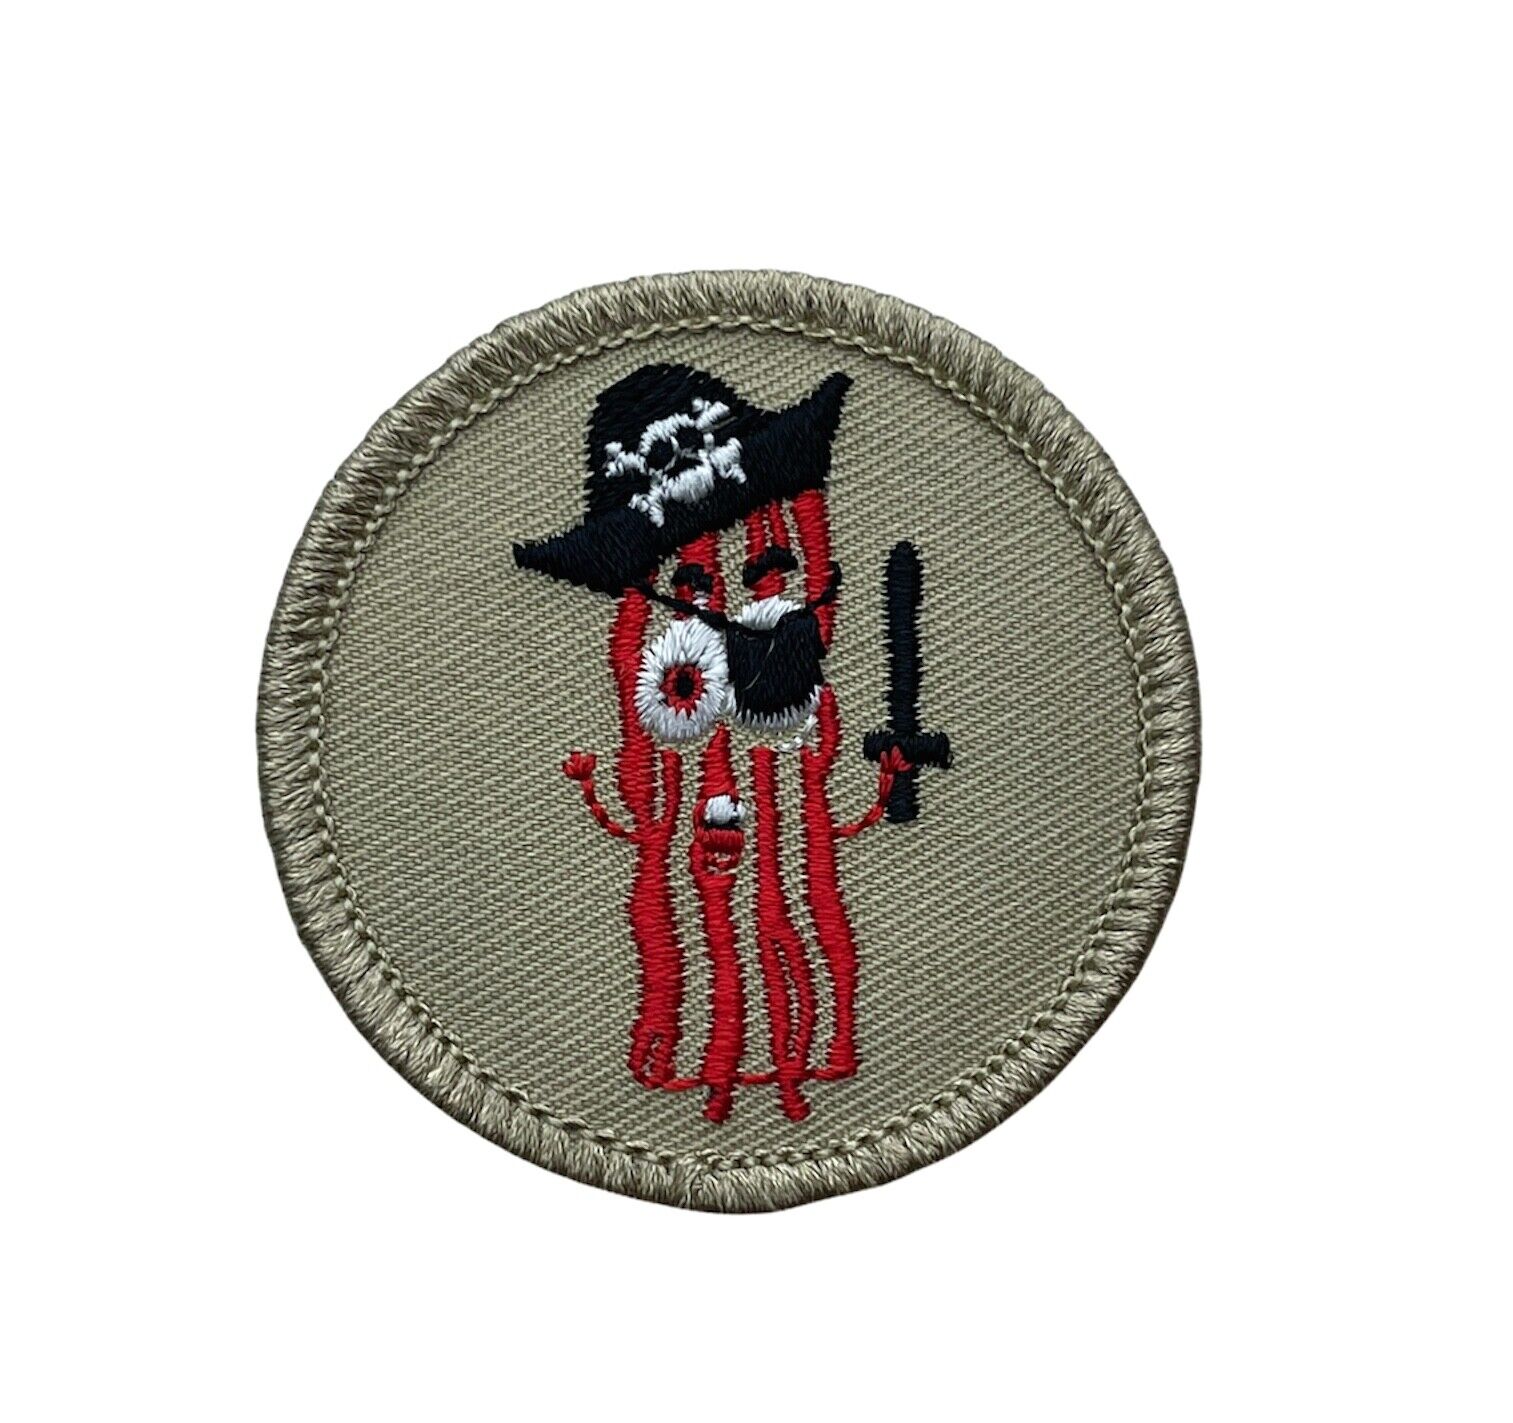 BSA Licensed Bacon Pirate Patrol Badge Boy Scout 2 inch Patch AVAQ0271 F6D9M